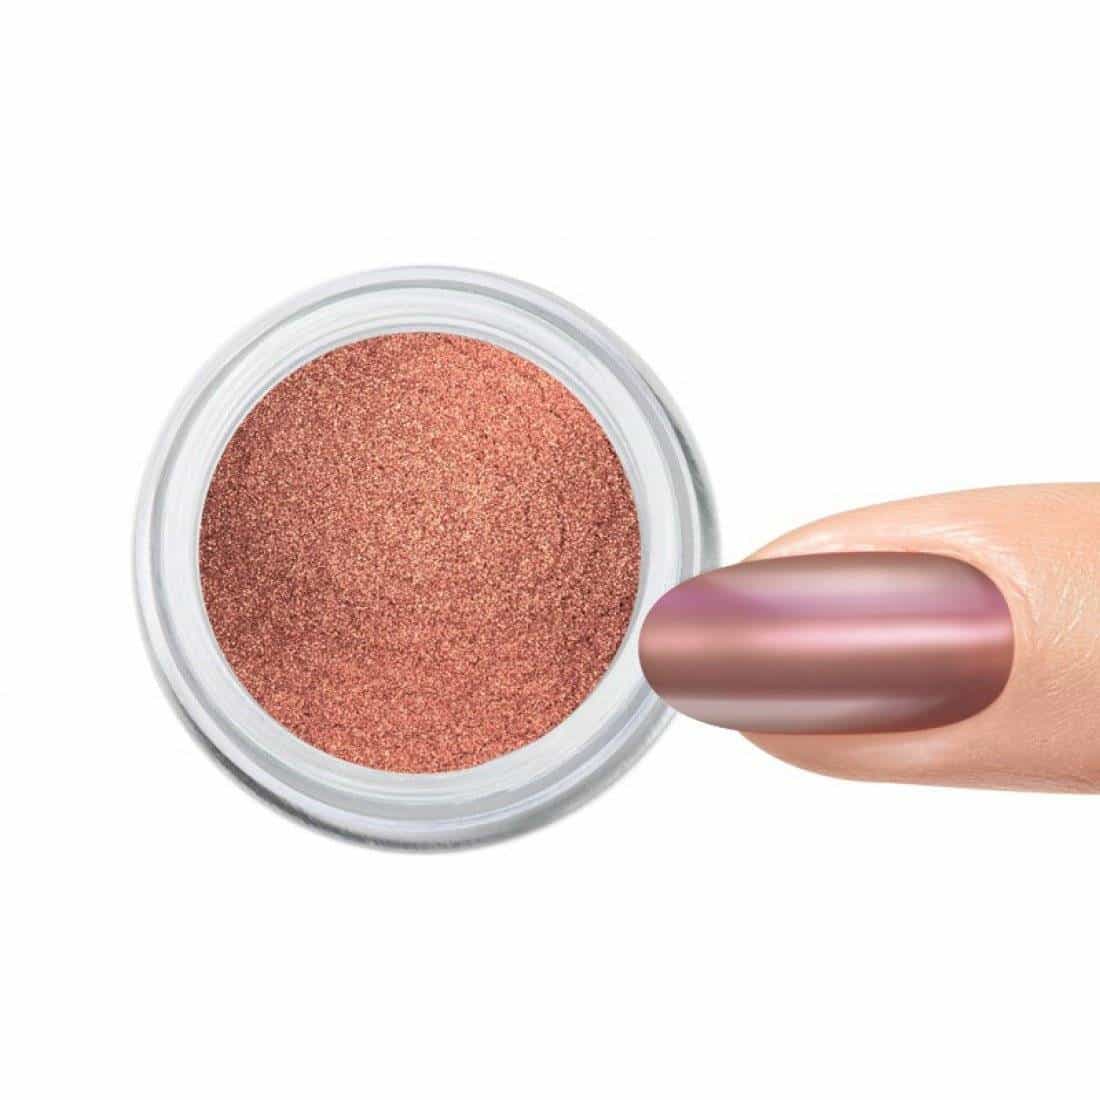 METALLIC NAIL POWDER ROSE GOLD- GLITTER POWDER FOR METAL VIEW ON NAILS -  The Beauty Bar